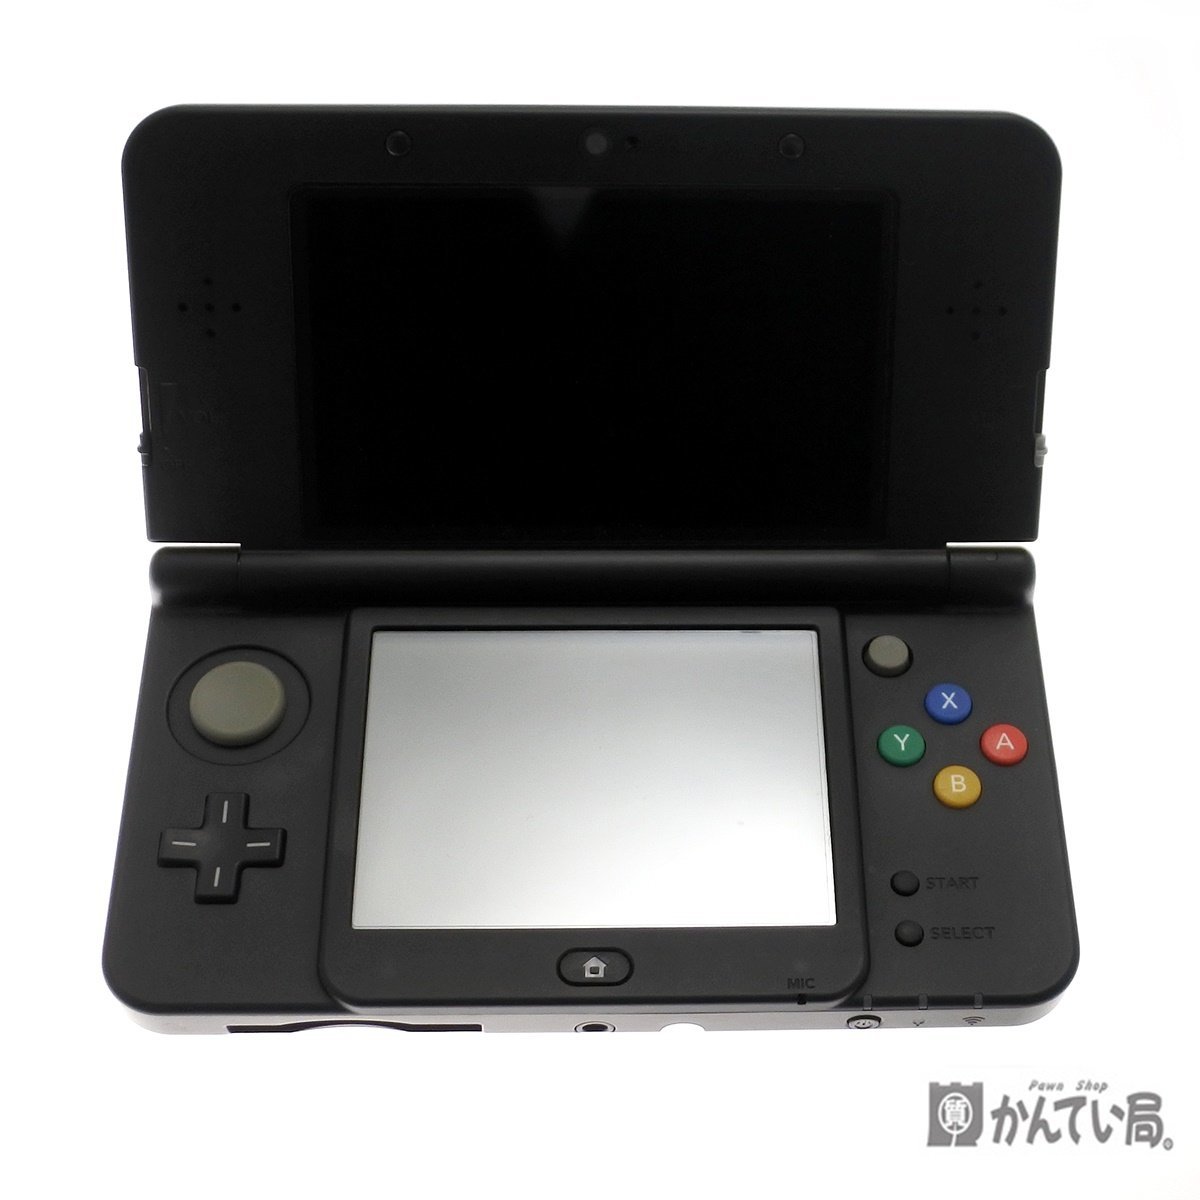 new3ds ブラック 新品未使用 | forext.org.br